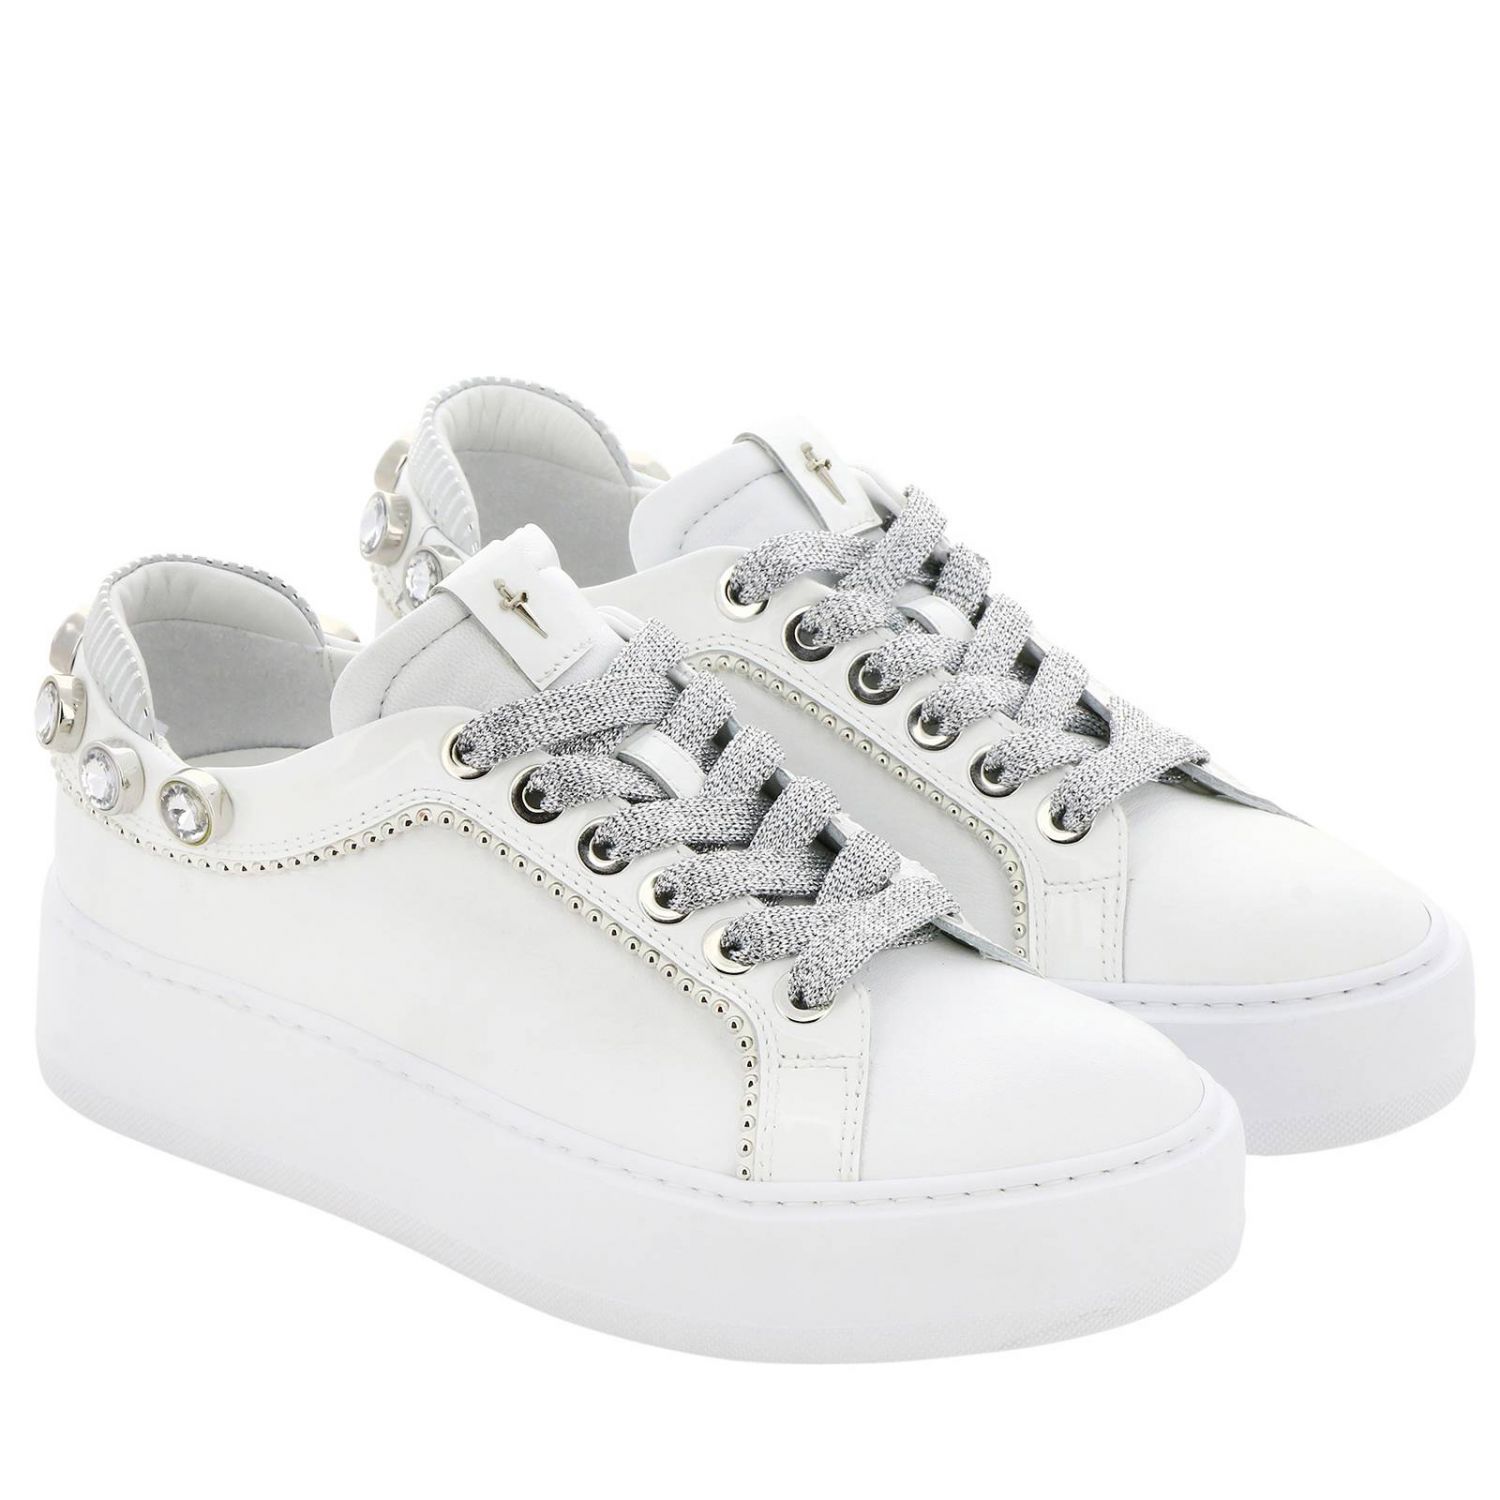 Paciotti 4Us Outlet: Shoes women - White | Sneakers Paciotti 4Us SD6NM ...